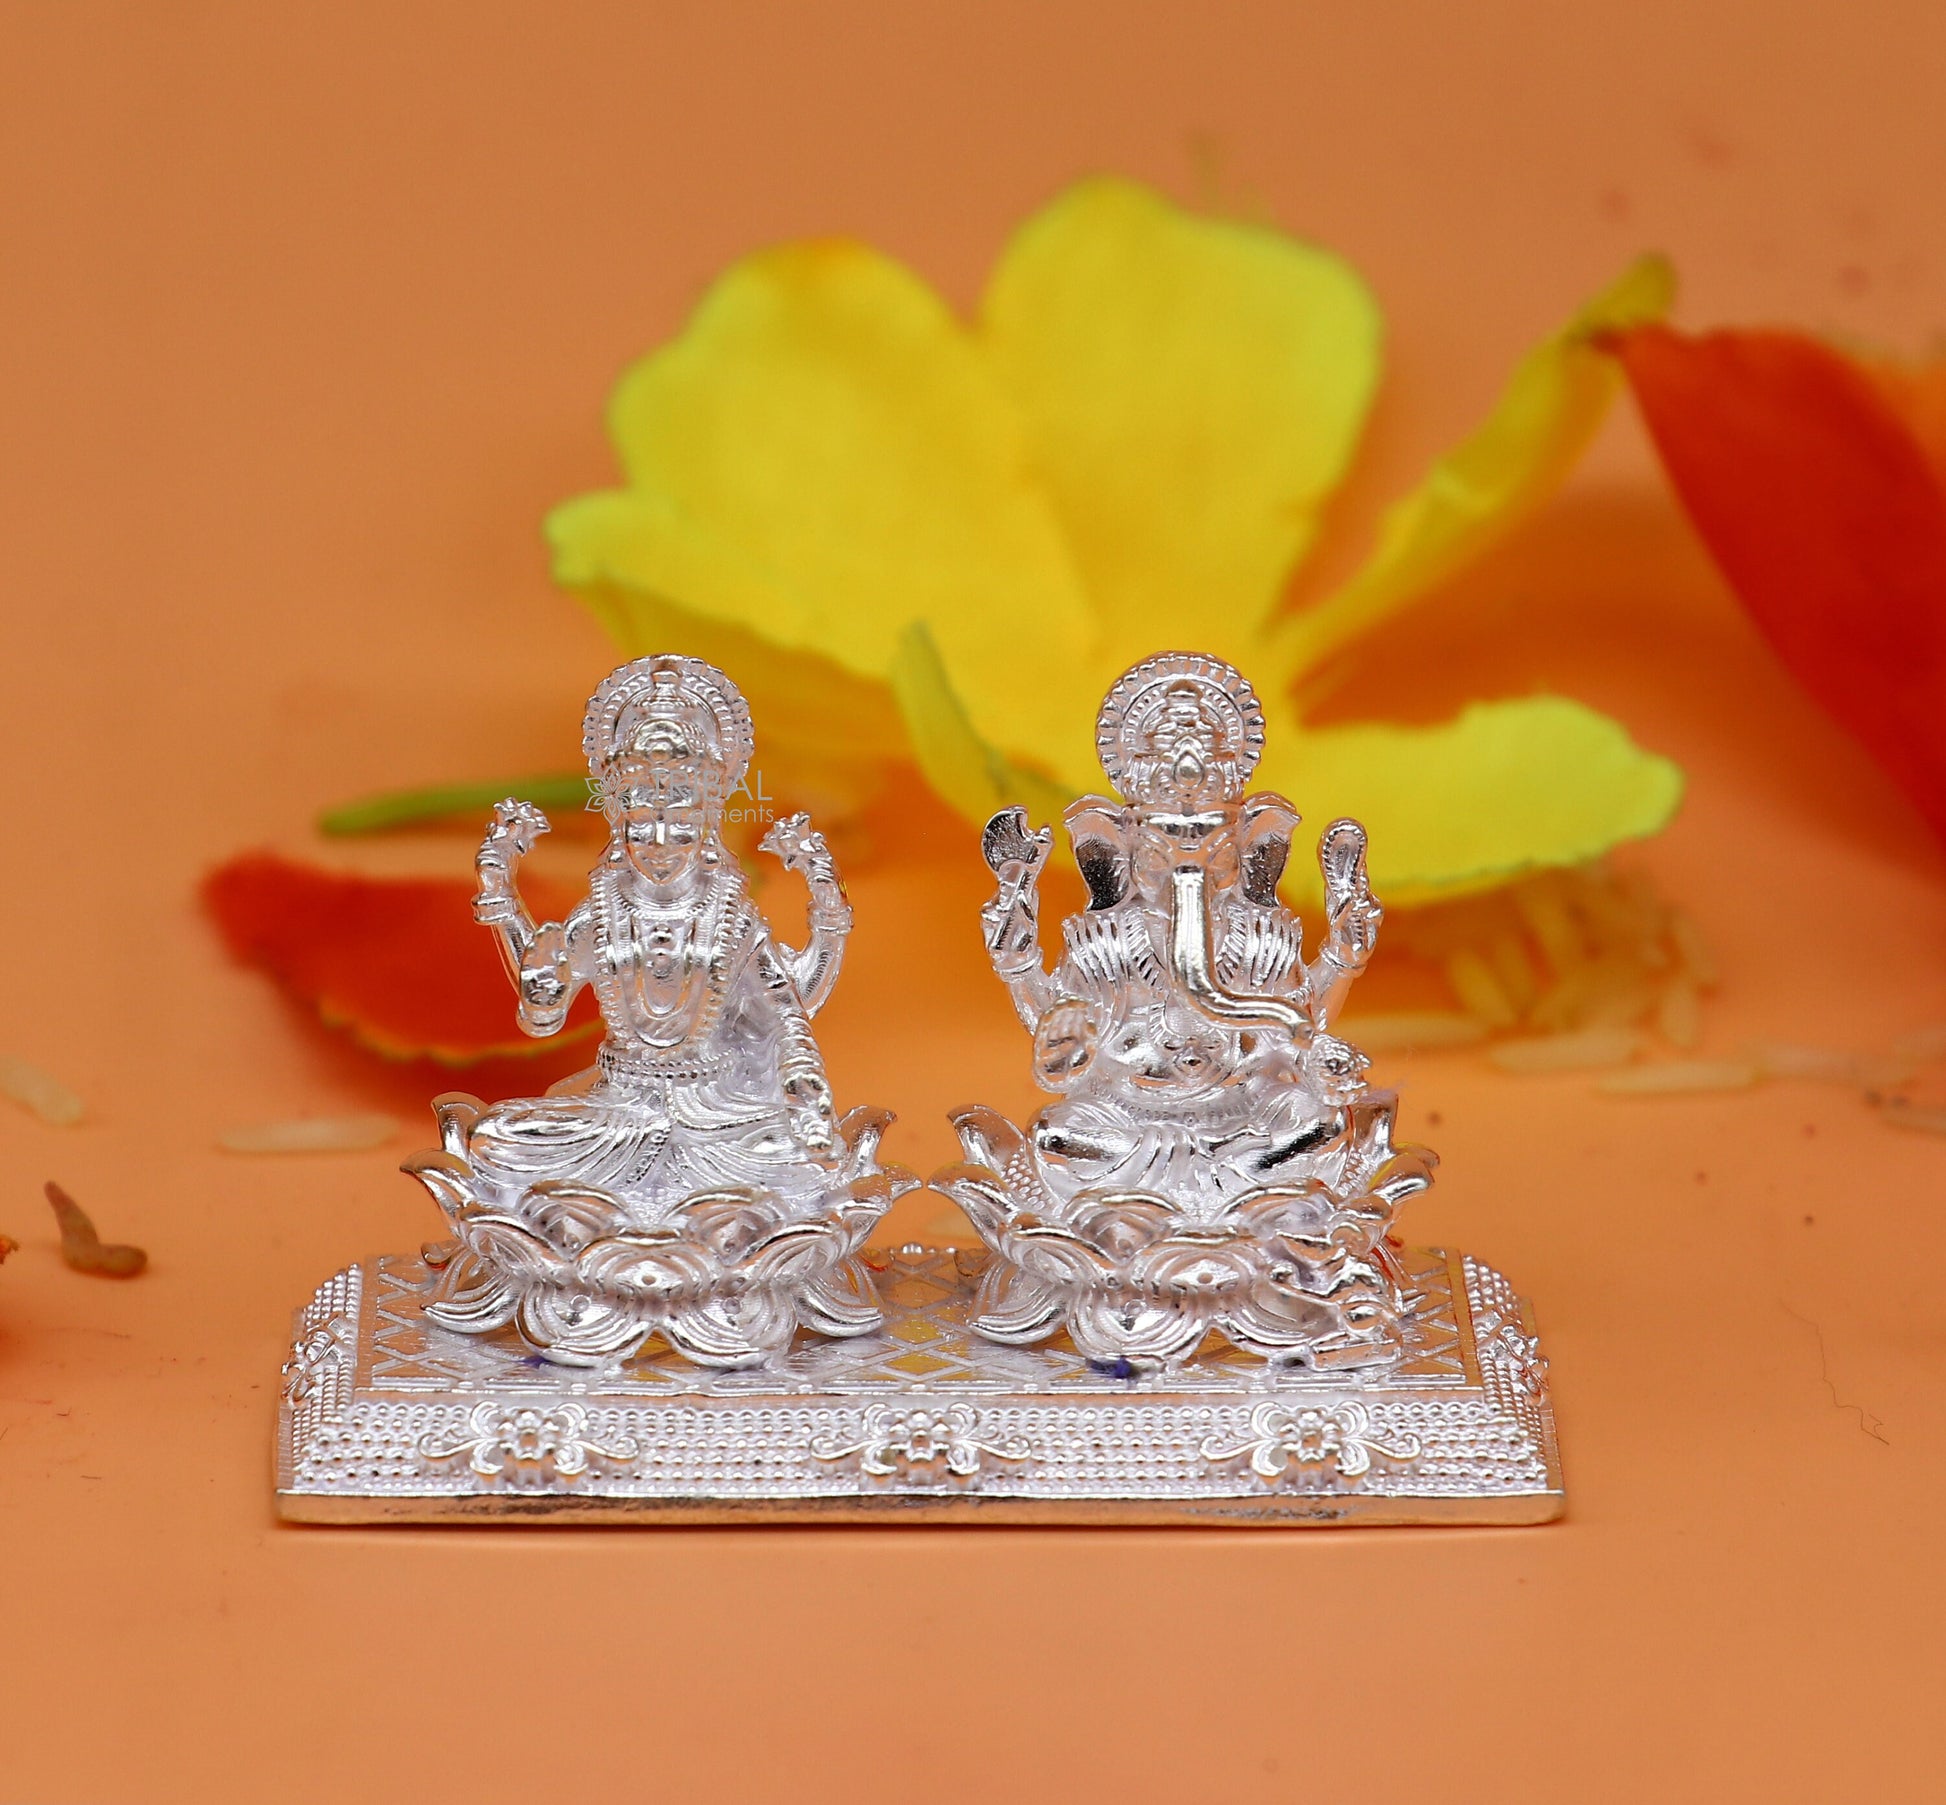 1.2" 925 Sterling silver Lakshmi and Ganesha statue, puja article figurine, Diwali puja brings joy, hope, and wealth to the owners art726 - TRIBAL ORNAMENTS